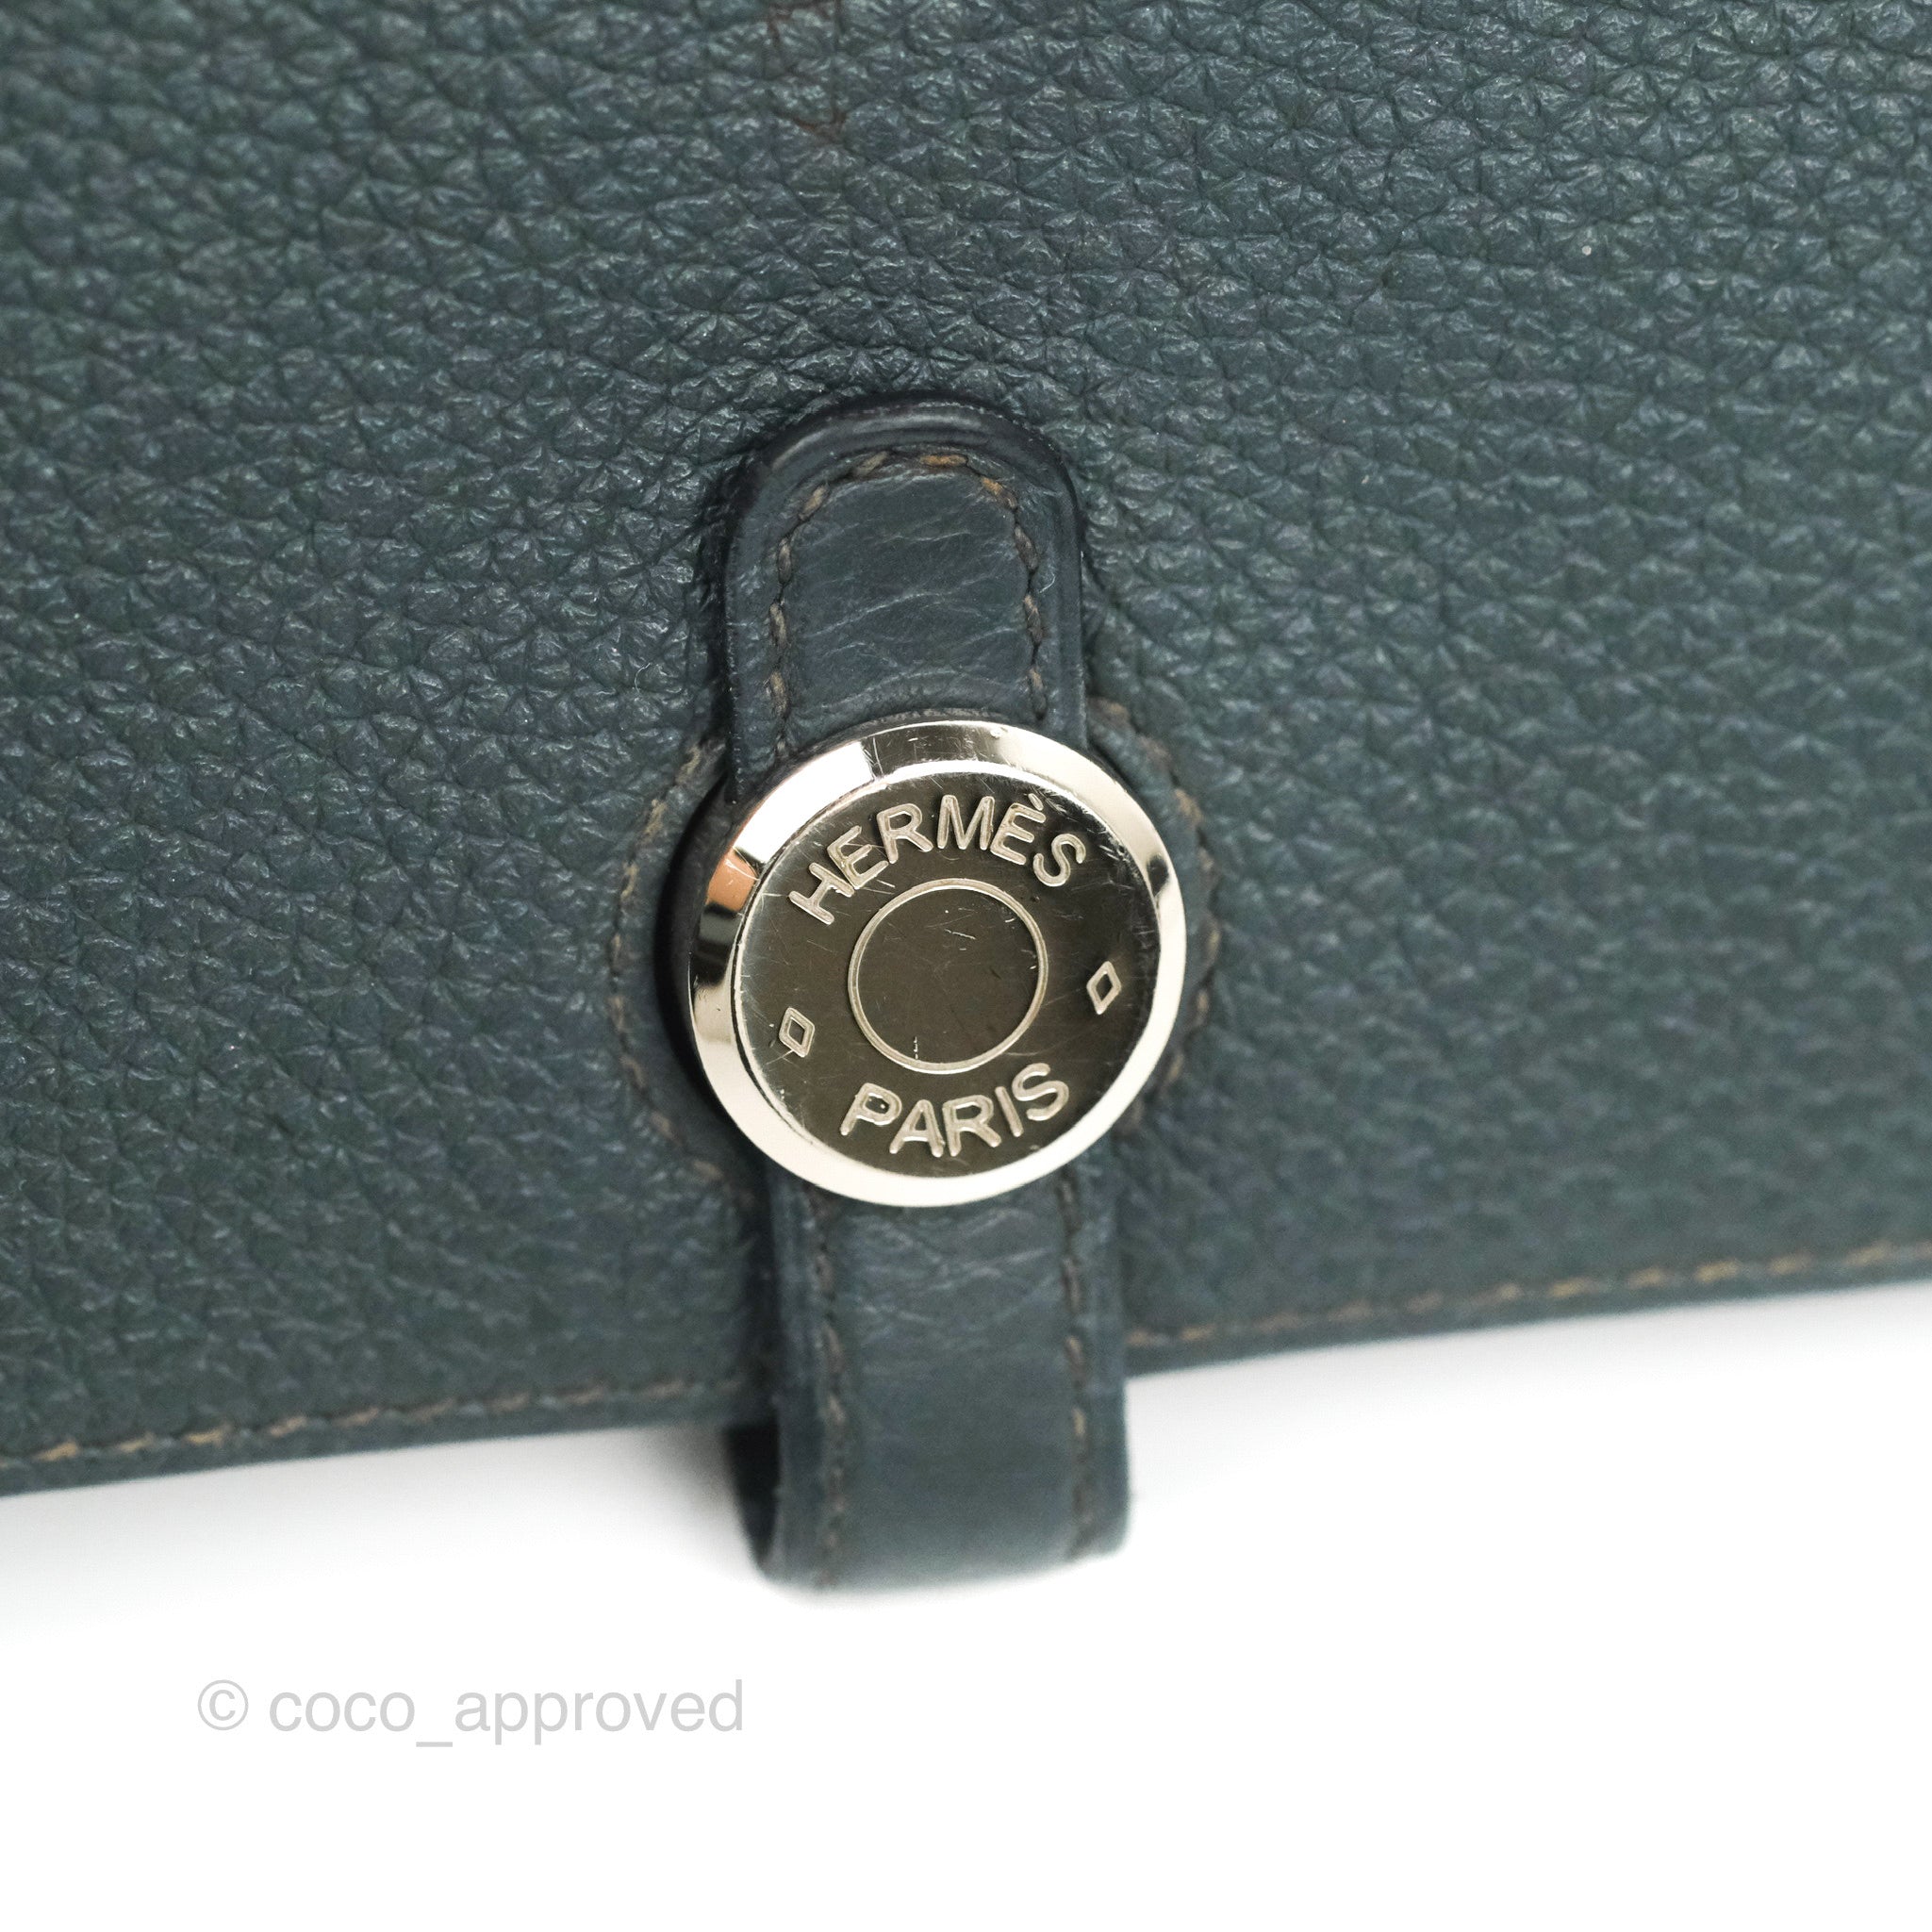 Hermes Dogon Compact Togo Wallet Auction